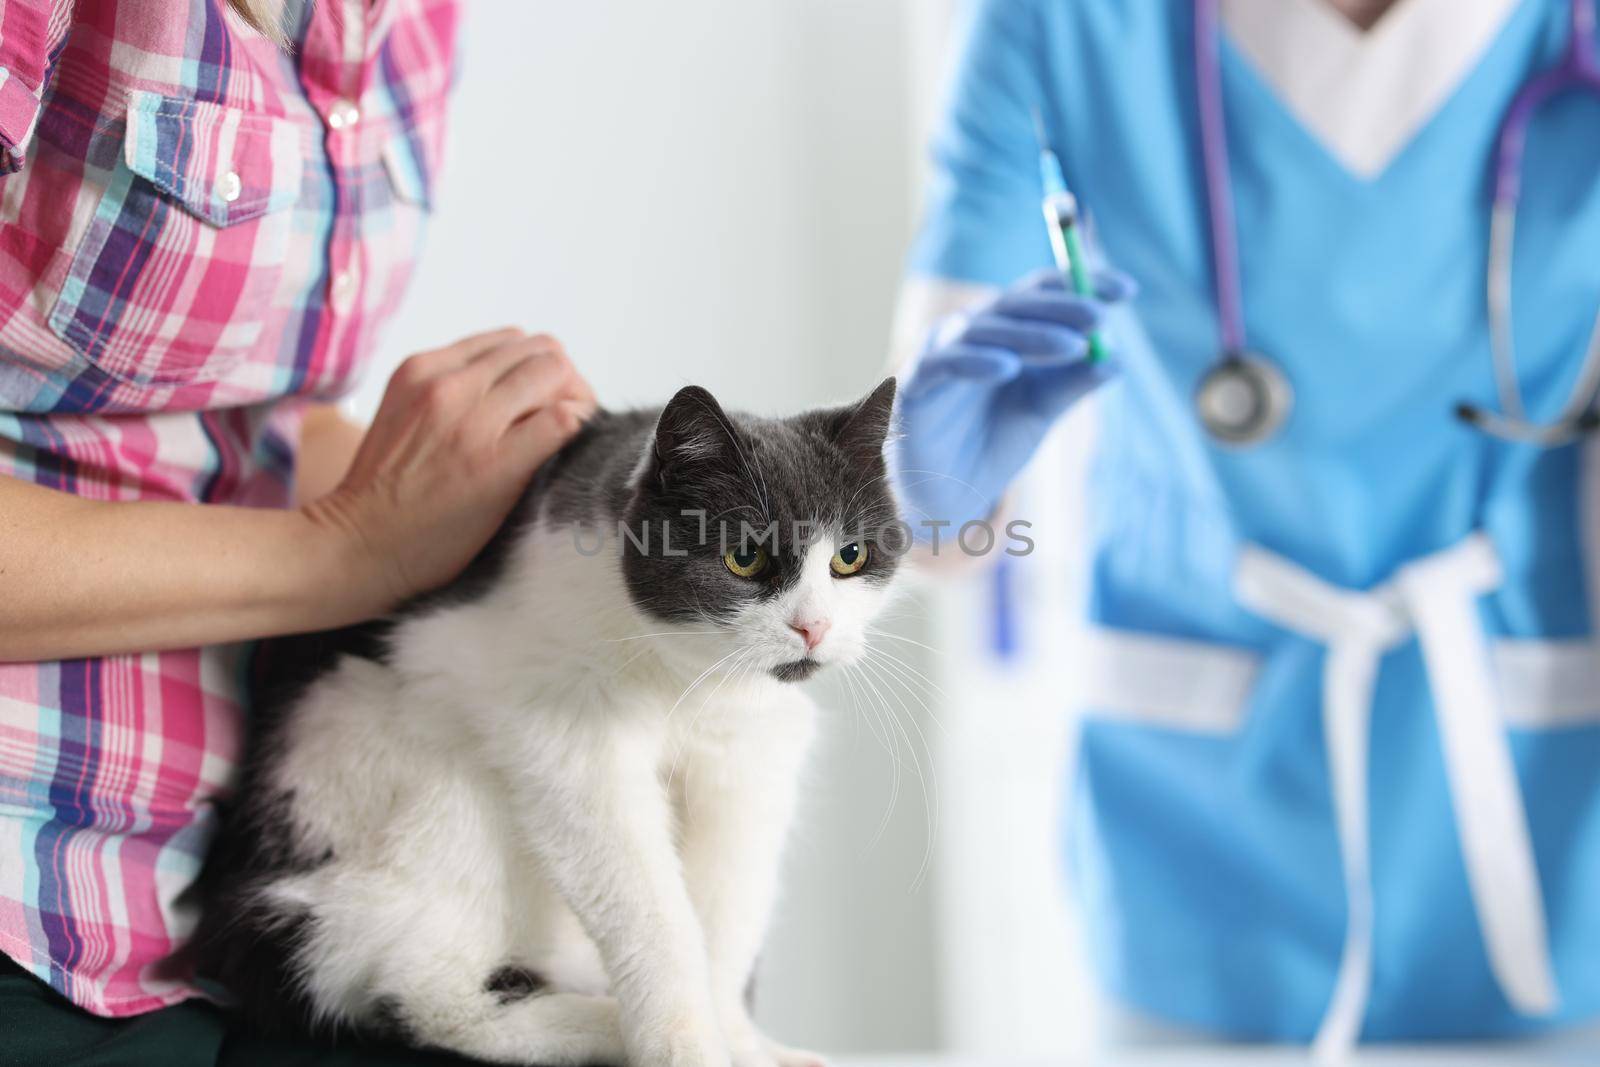 Veterinarian doctor vaccinating cat at vet clinic. Injections to animals concept